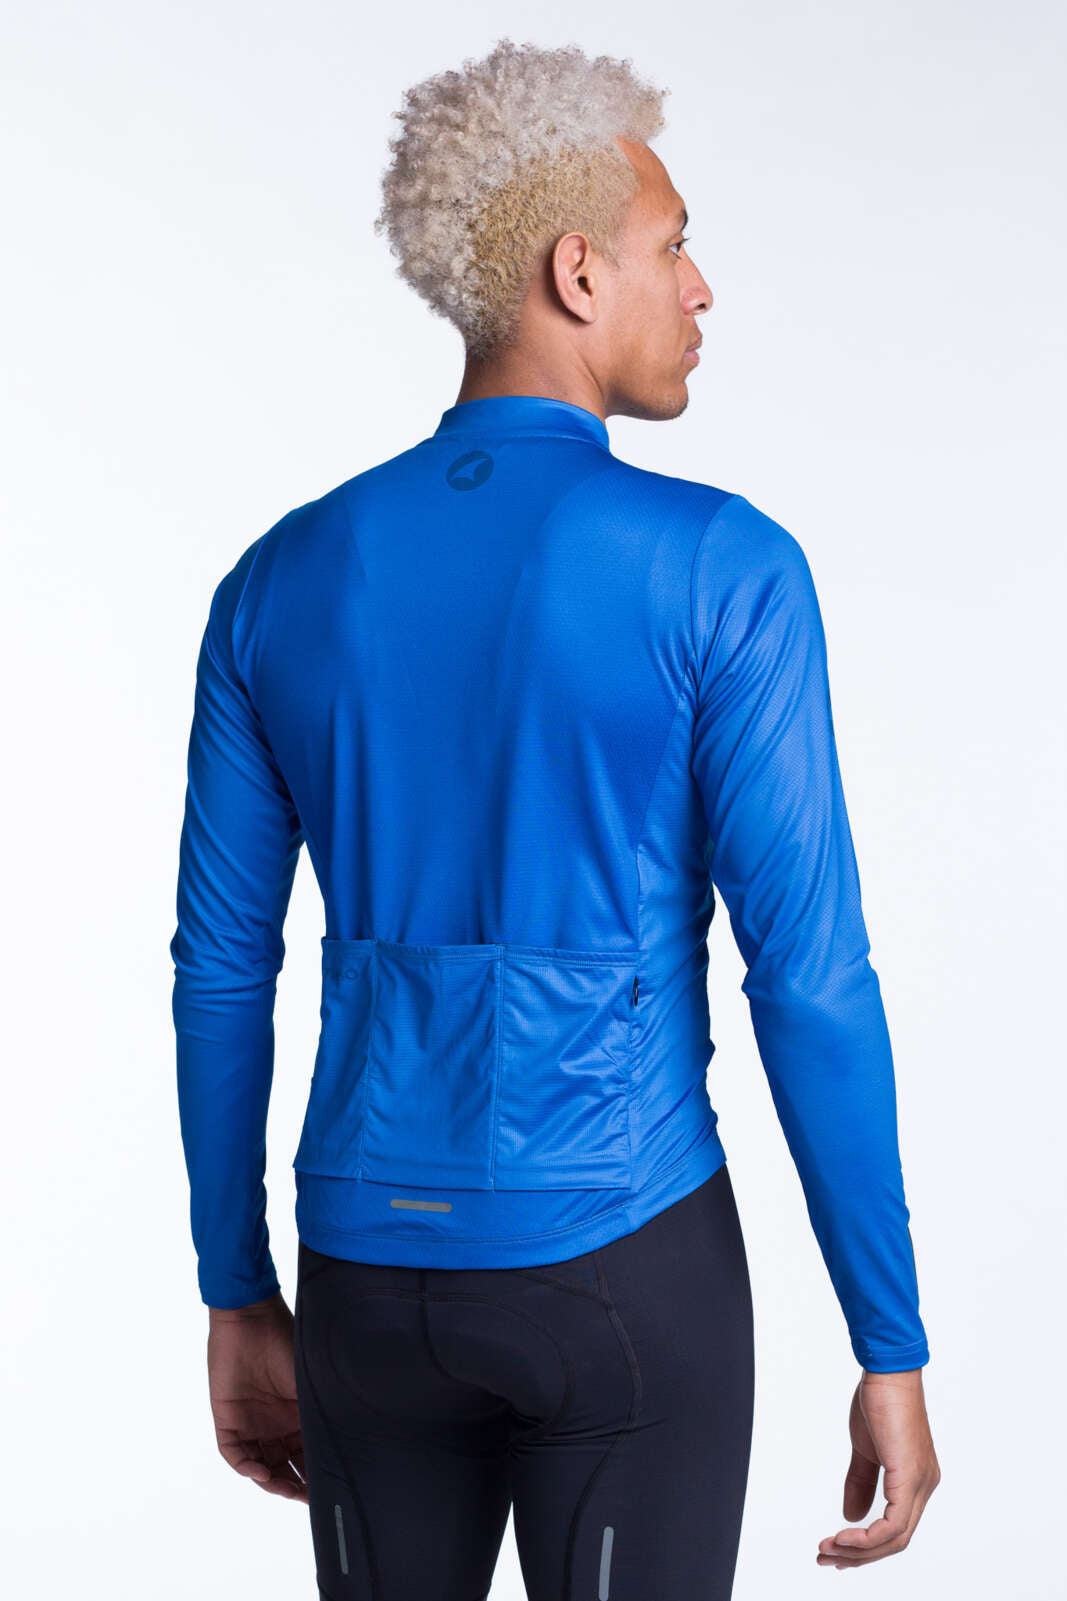 Men's Blue Long Sleeve Cycling Jersey - Ascent Back View